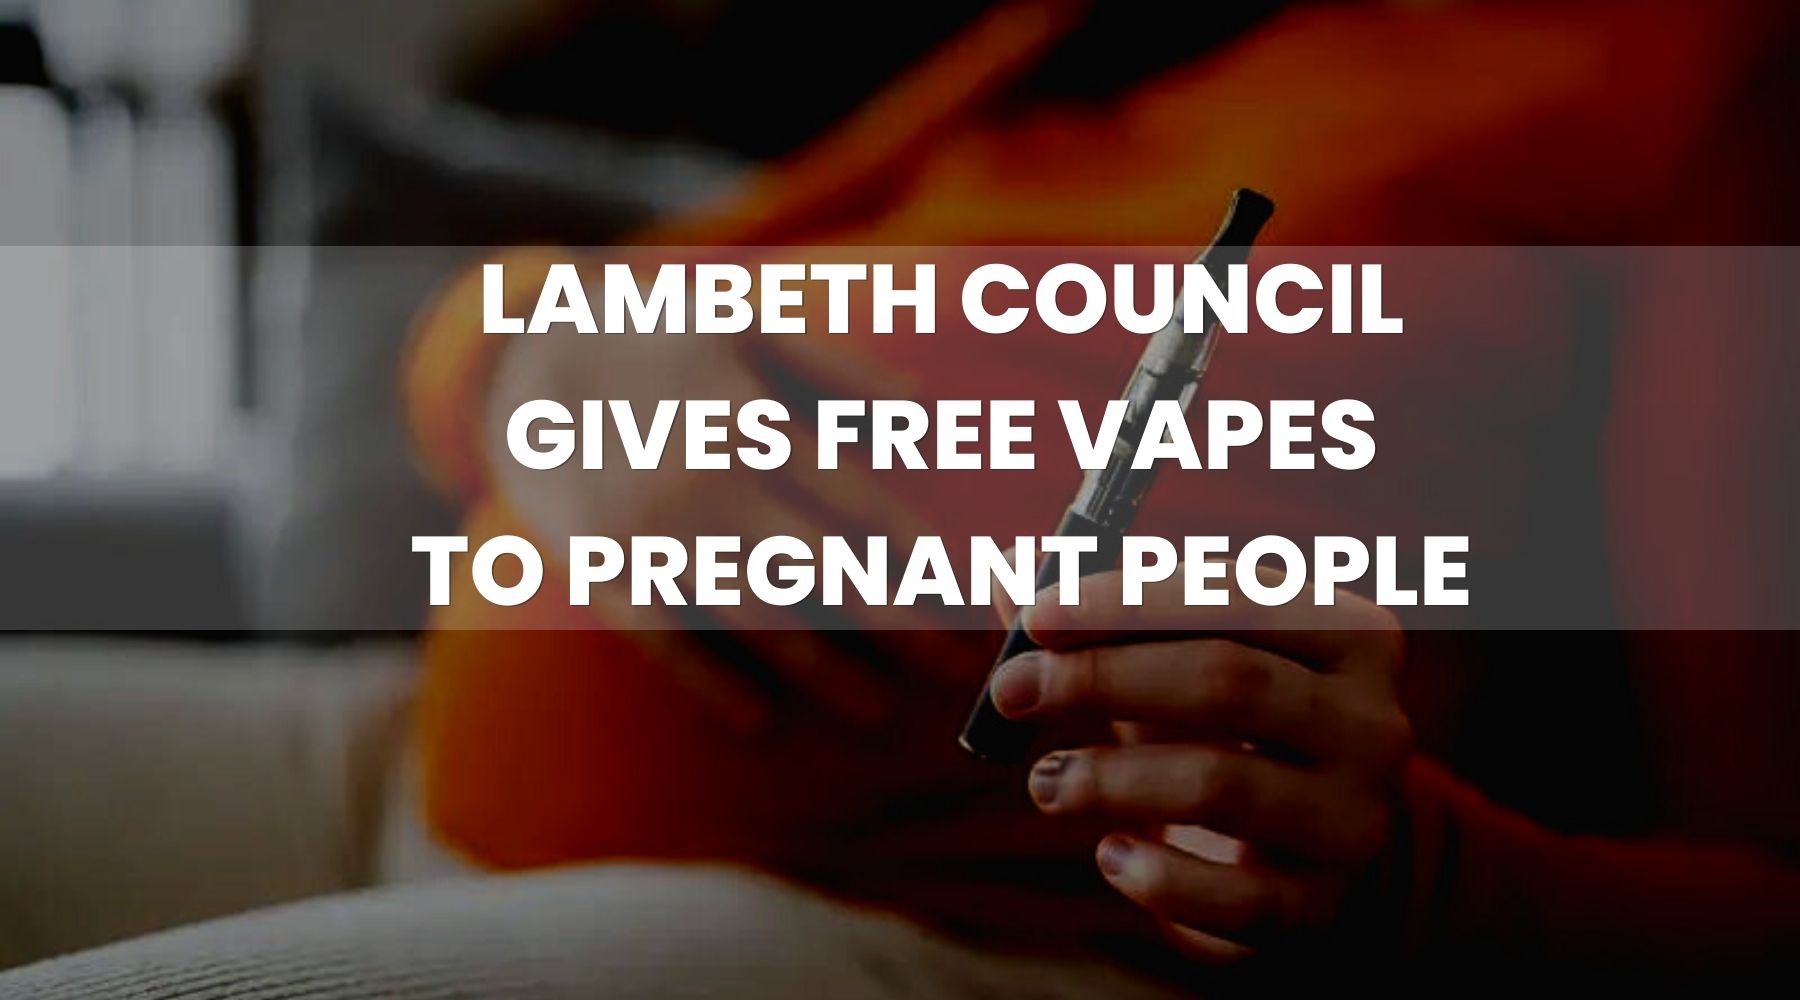 Lambeth Council Gives Free Vapes to Pregnant People